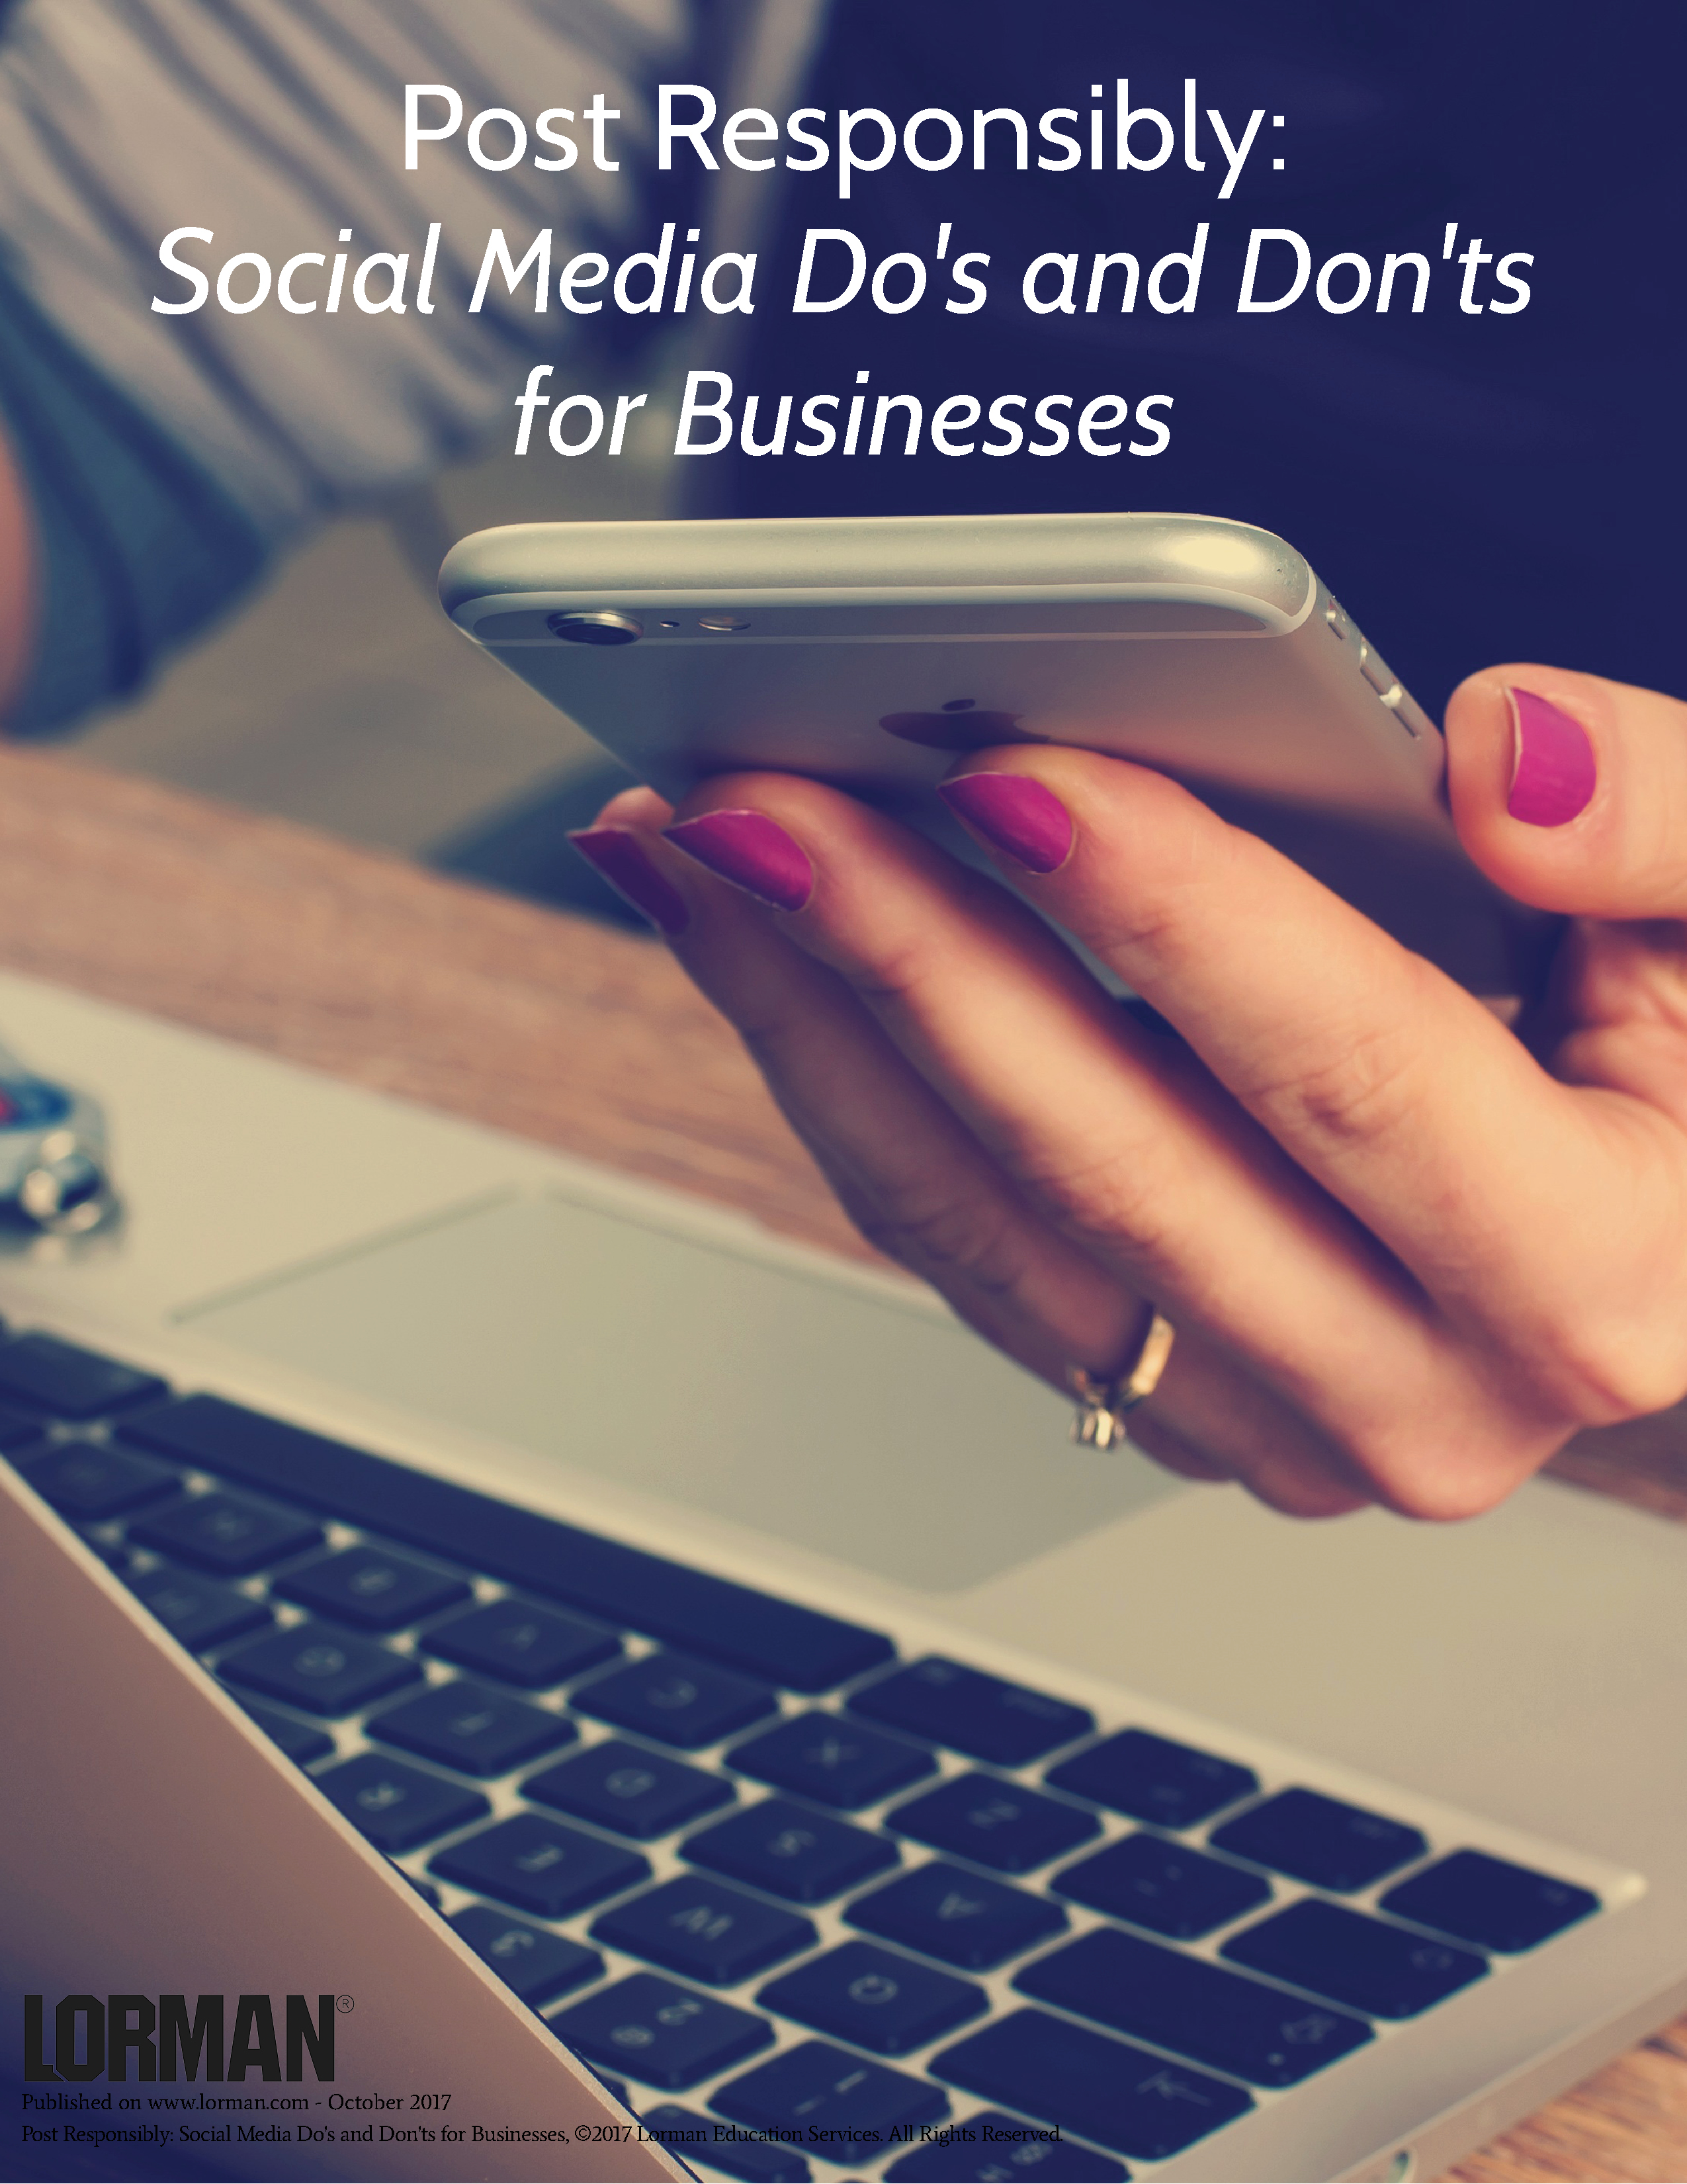 Post Responsibly: Social Media Do's and Don'ts for Businesses